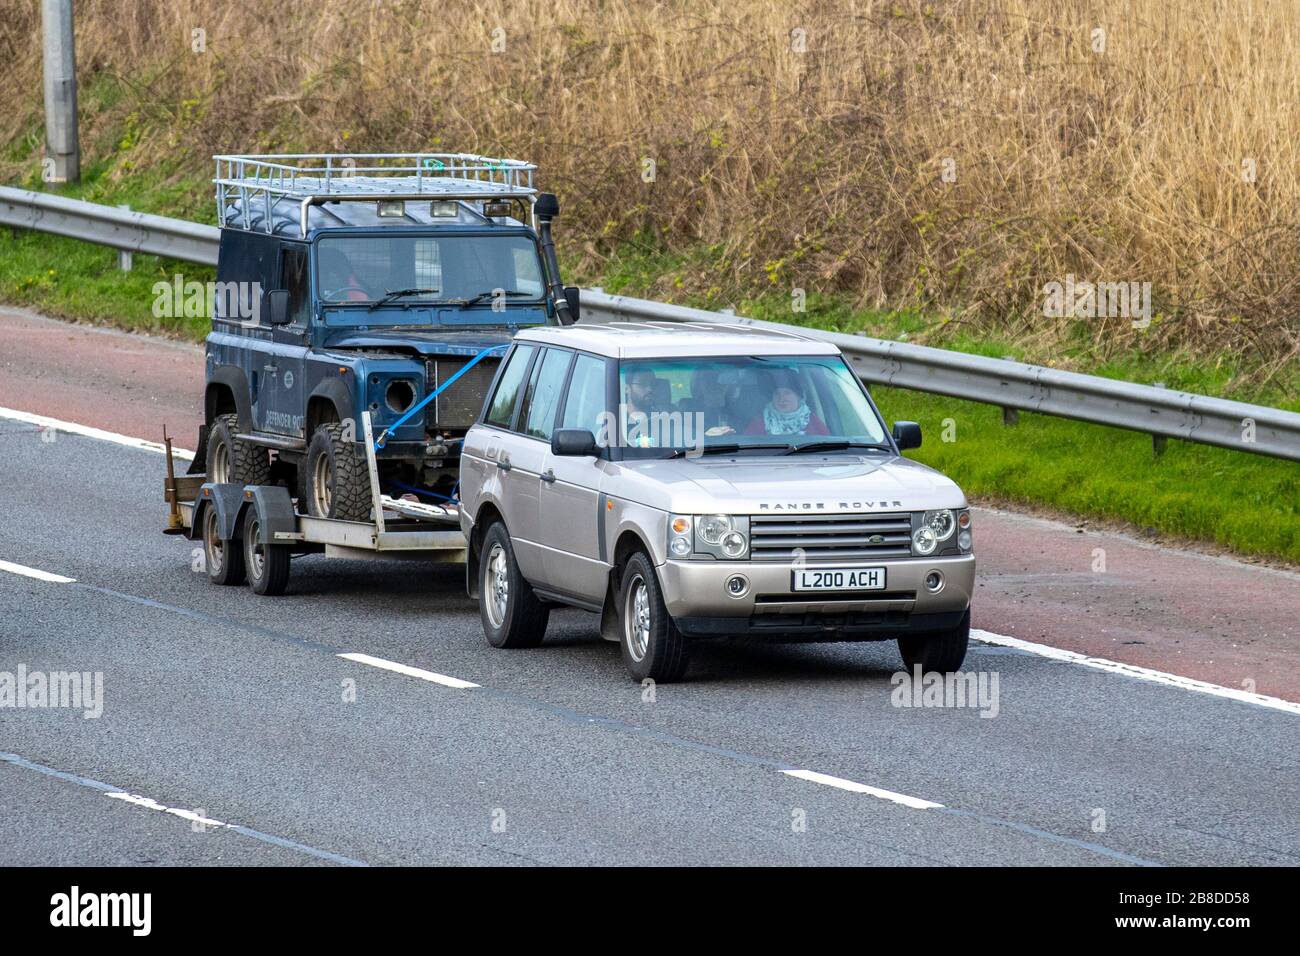 Range Rover towing decrepit dilapidated old Land Rover Defender. A restoration project, towed barn find; UK vehicular traffic, transport, moving vehicles, restoration vehicle, roads, towing motors, motoring trailer on the M6 motorway highway Stock Photo